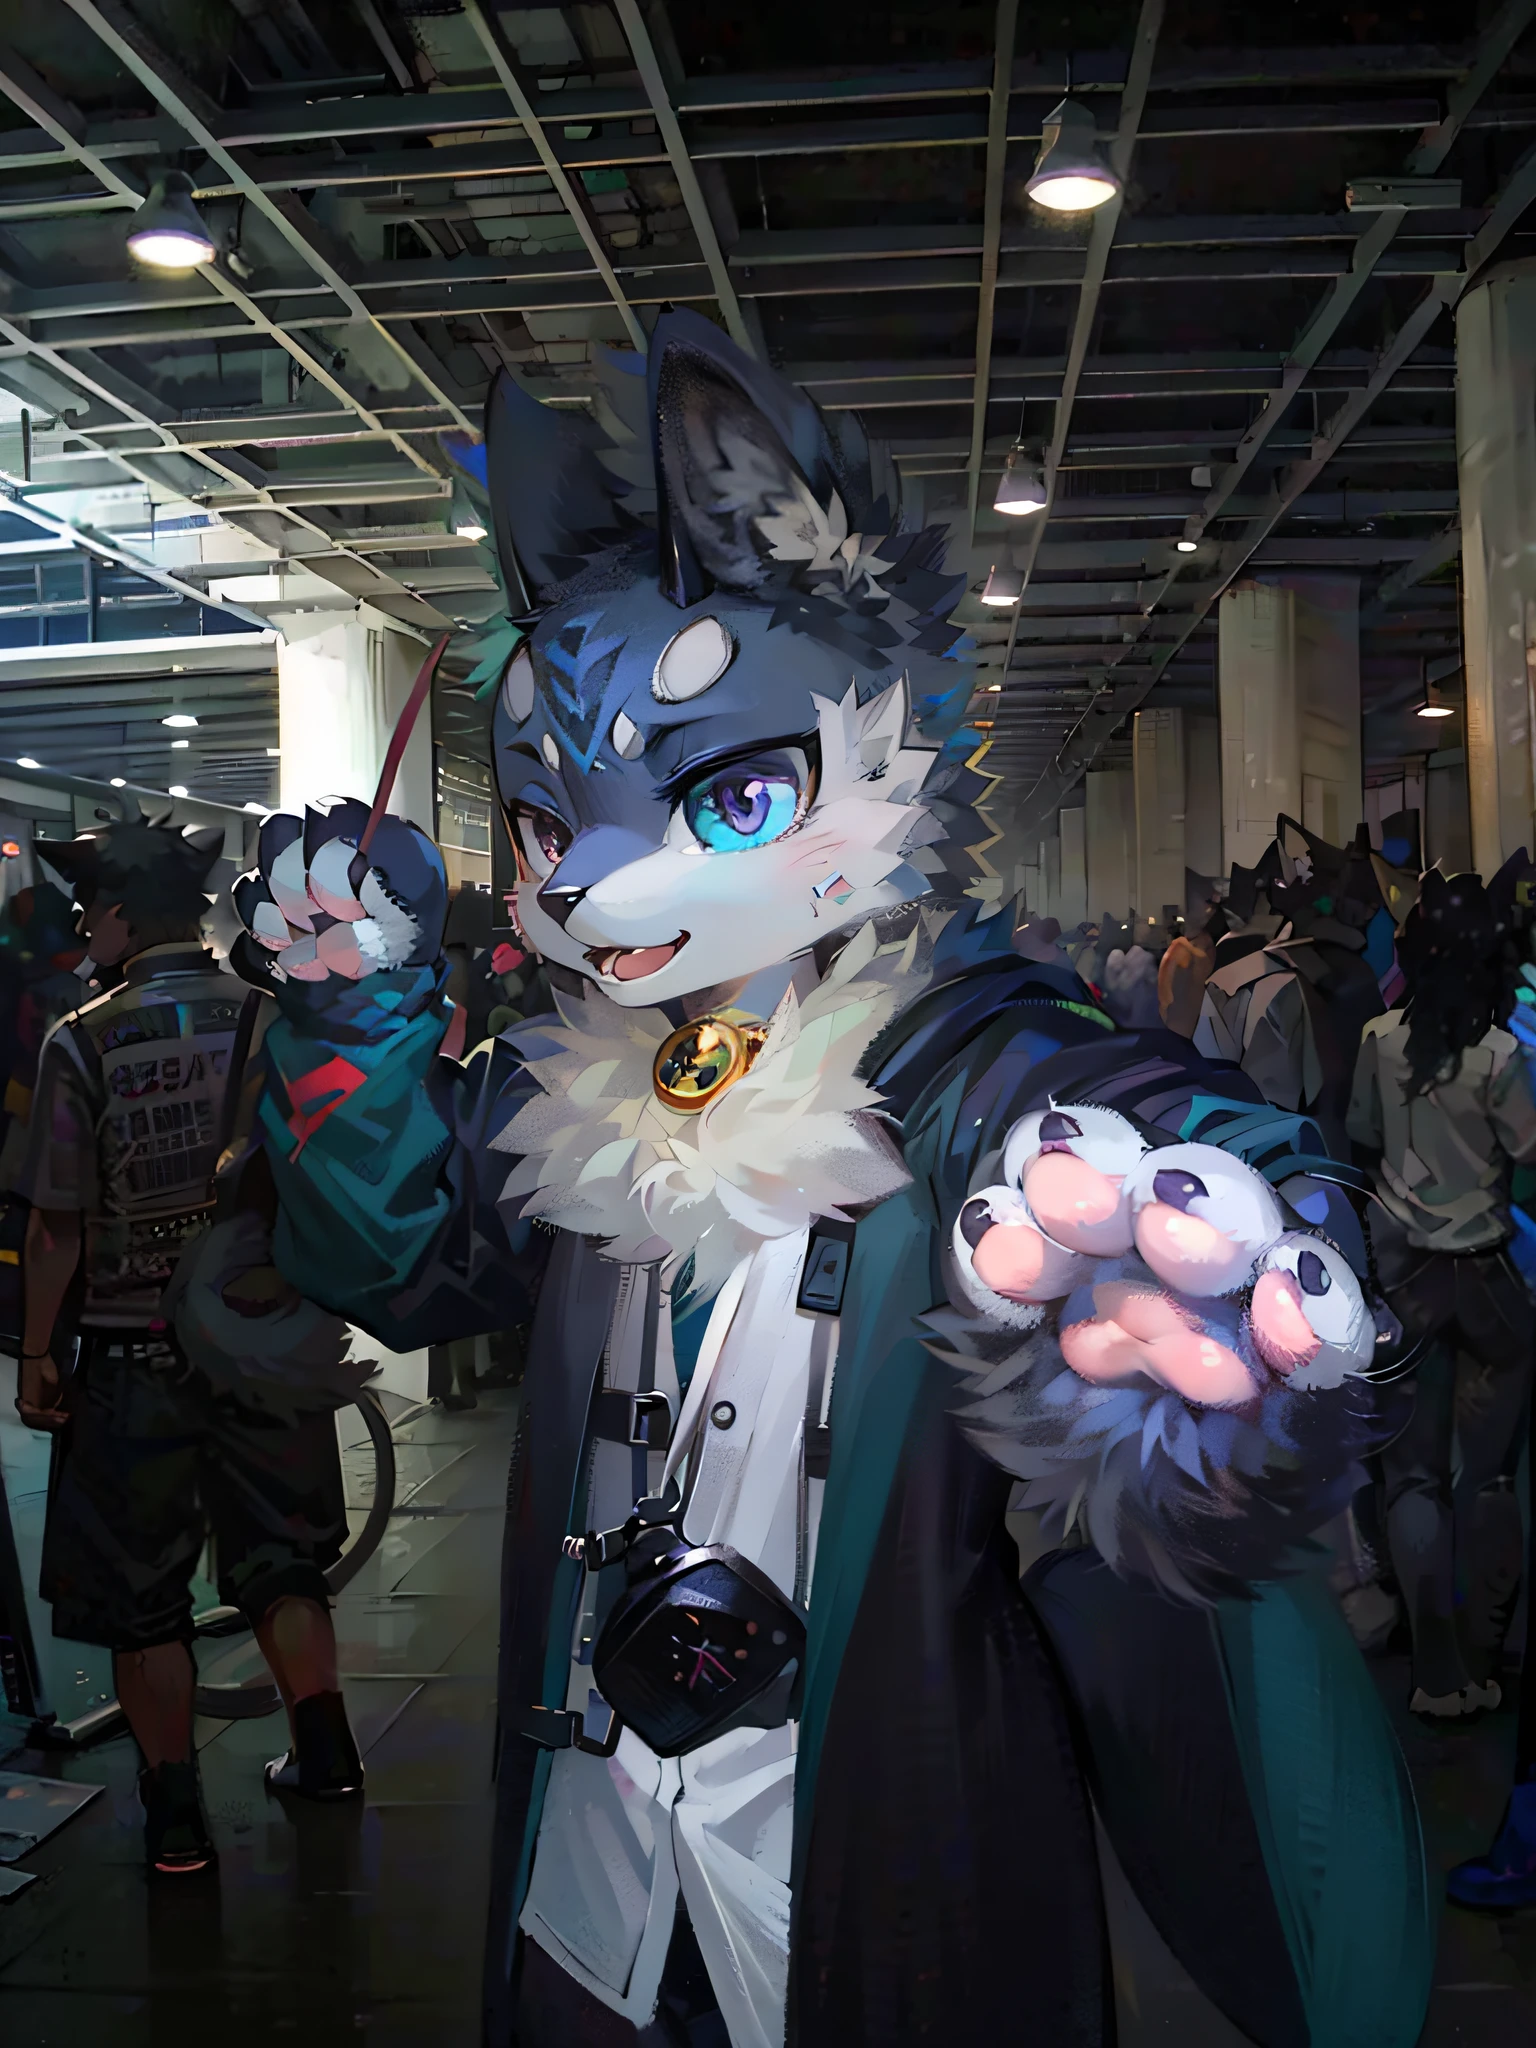 there is a man in a costume with a cat mask and a cat puppet, fursona!!!!, furry fursona, fursuit, furry character, furry anime, fursuit!!!!, female fursona, furry convention, fursona, furry paws furry, furry shot, the furry fursuit is running, neko, very hairy, furry artist, pov furry art, anthropomorphic lynx